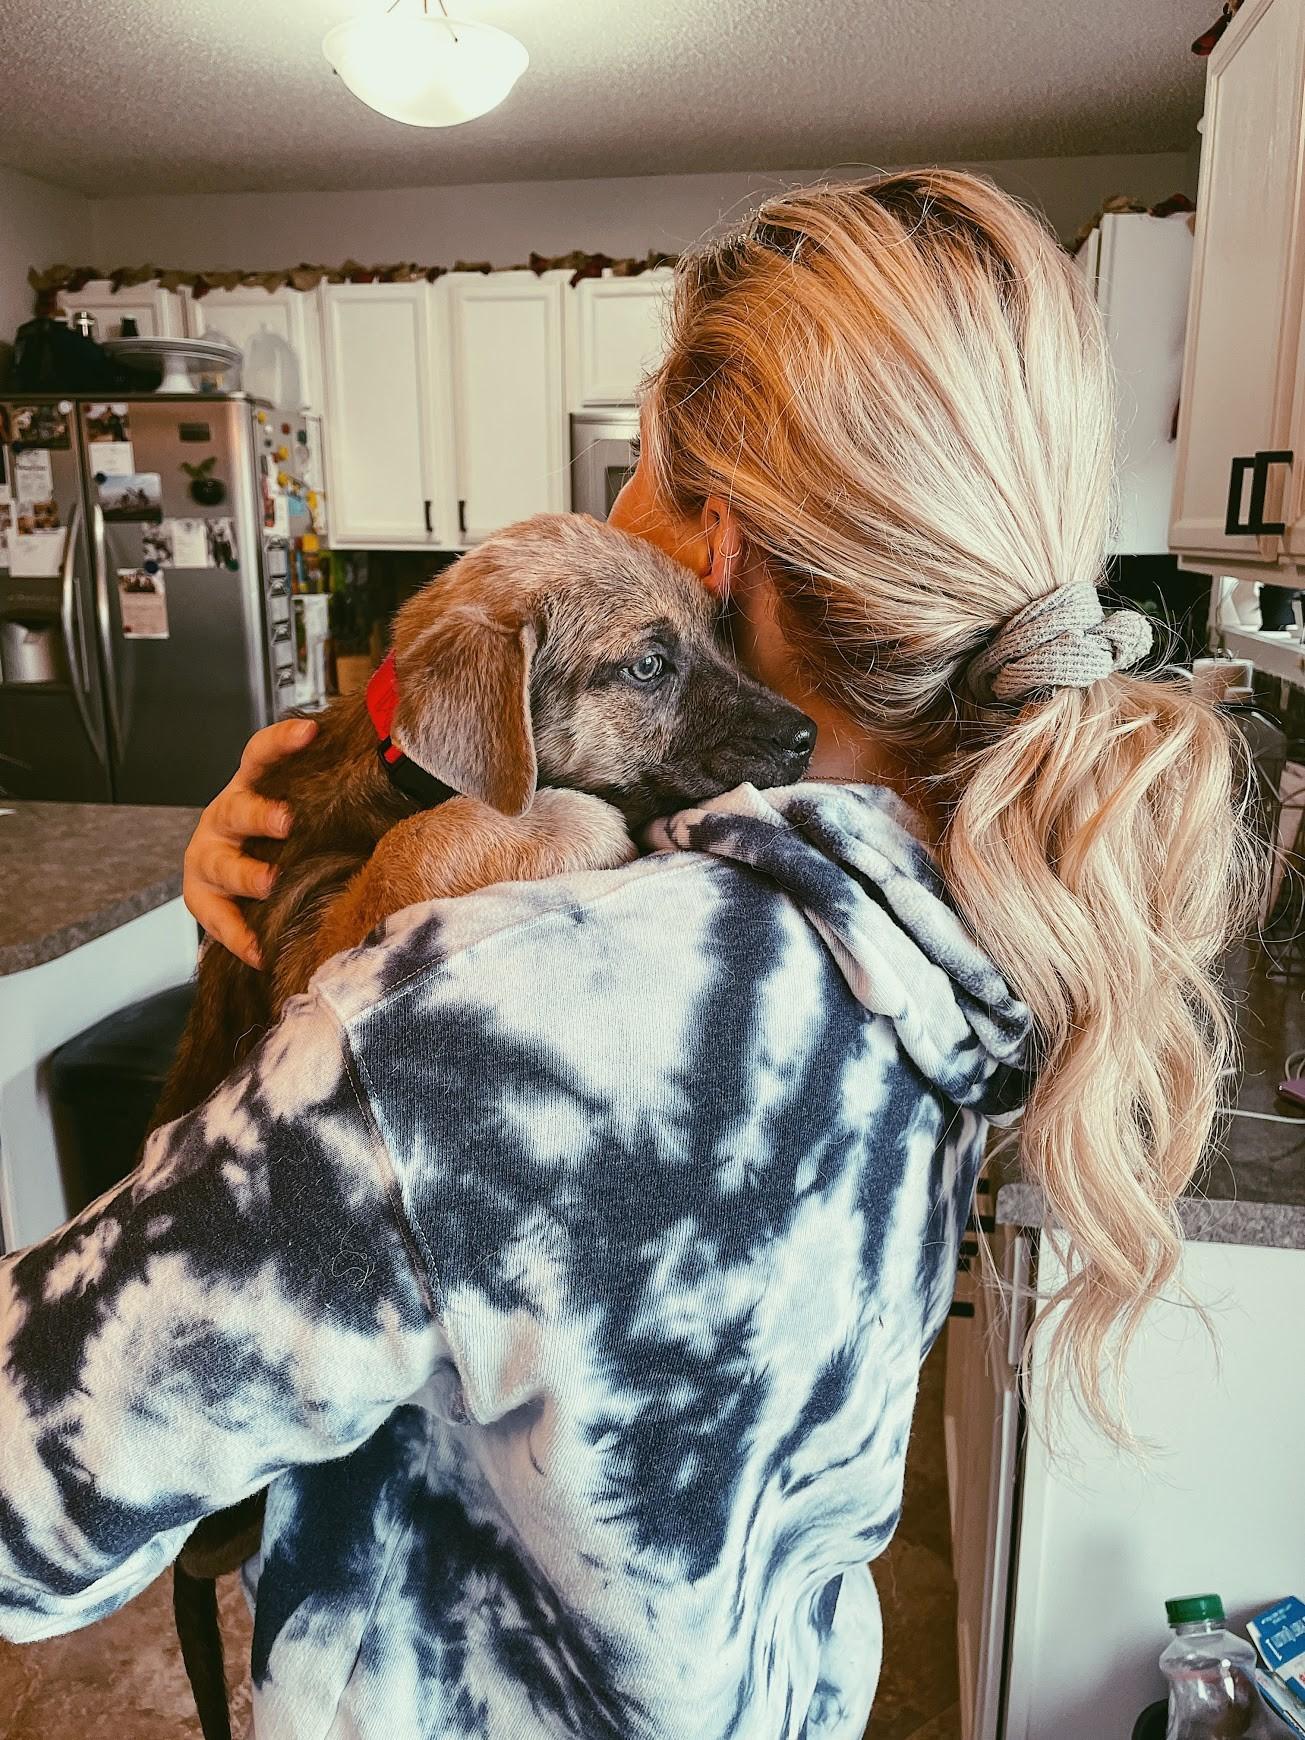 A woman with long blonde hair holds a brown puppy over her shoulder. The picture is taken from the back of the woman.